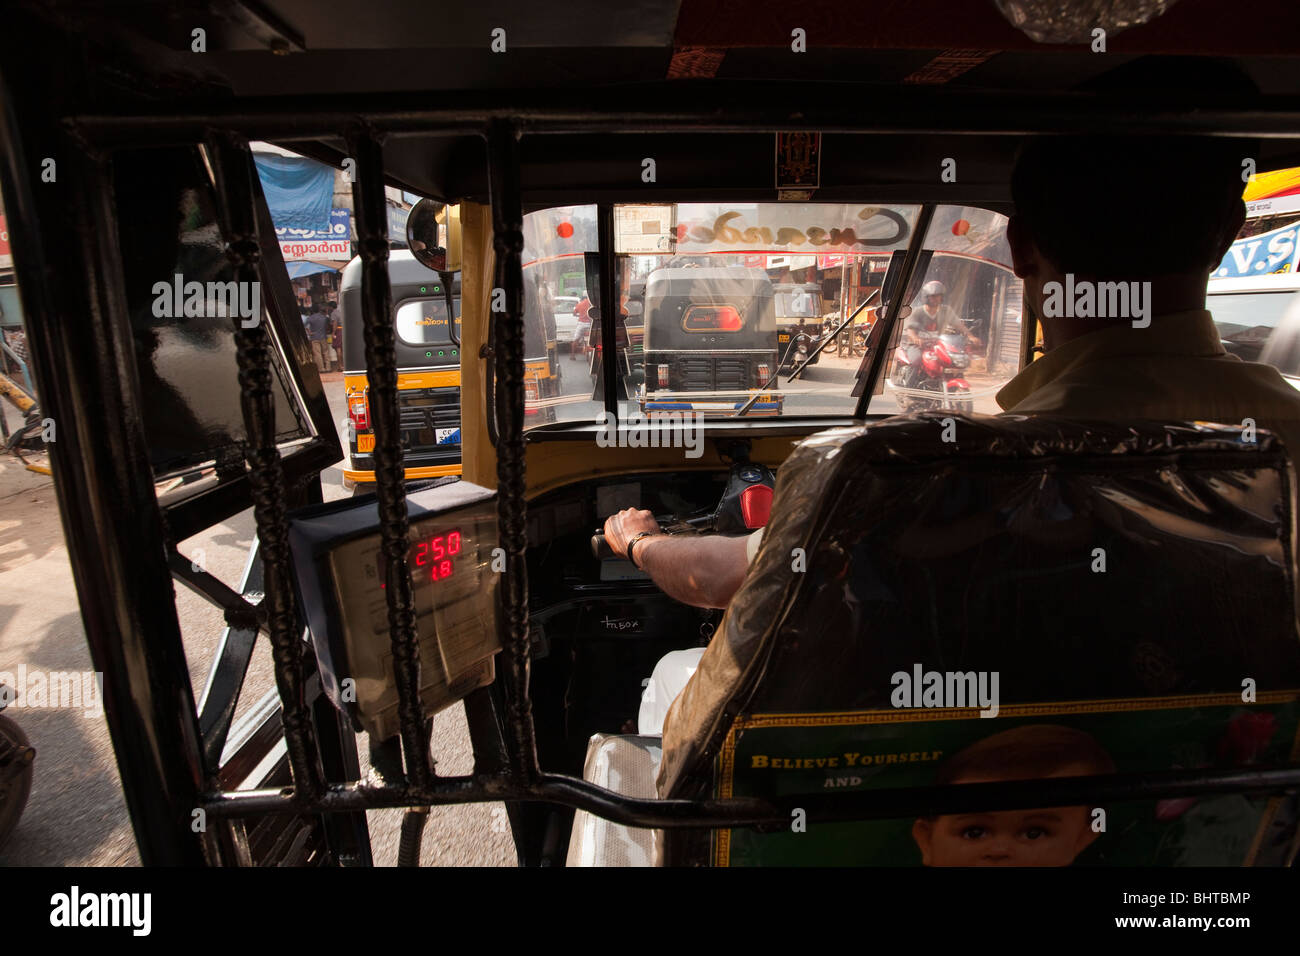 India, Kerala, Calicut, Kozhikode, local travel, view from inside moving autorickshaw with working meter Stock Photo